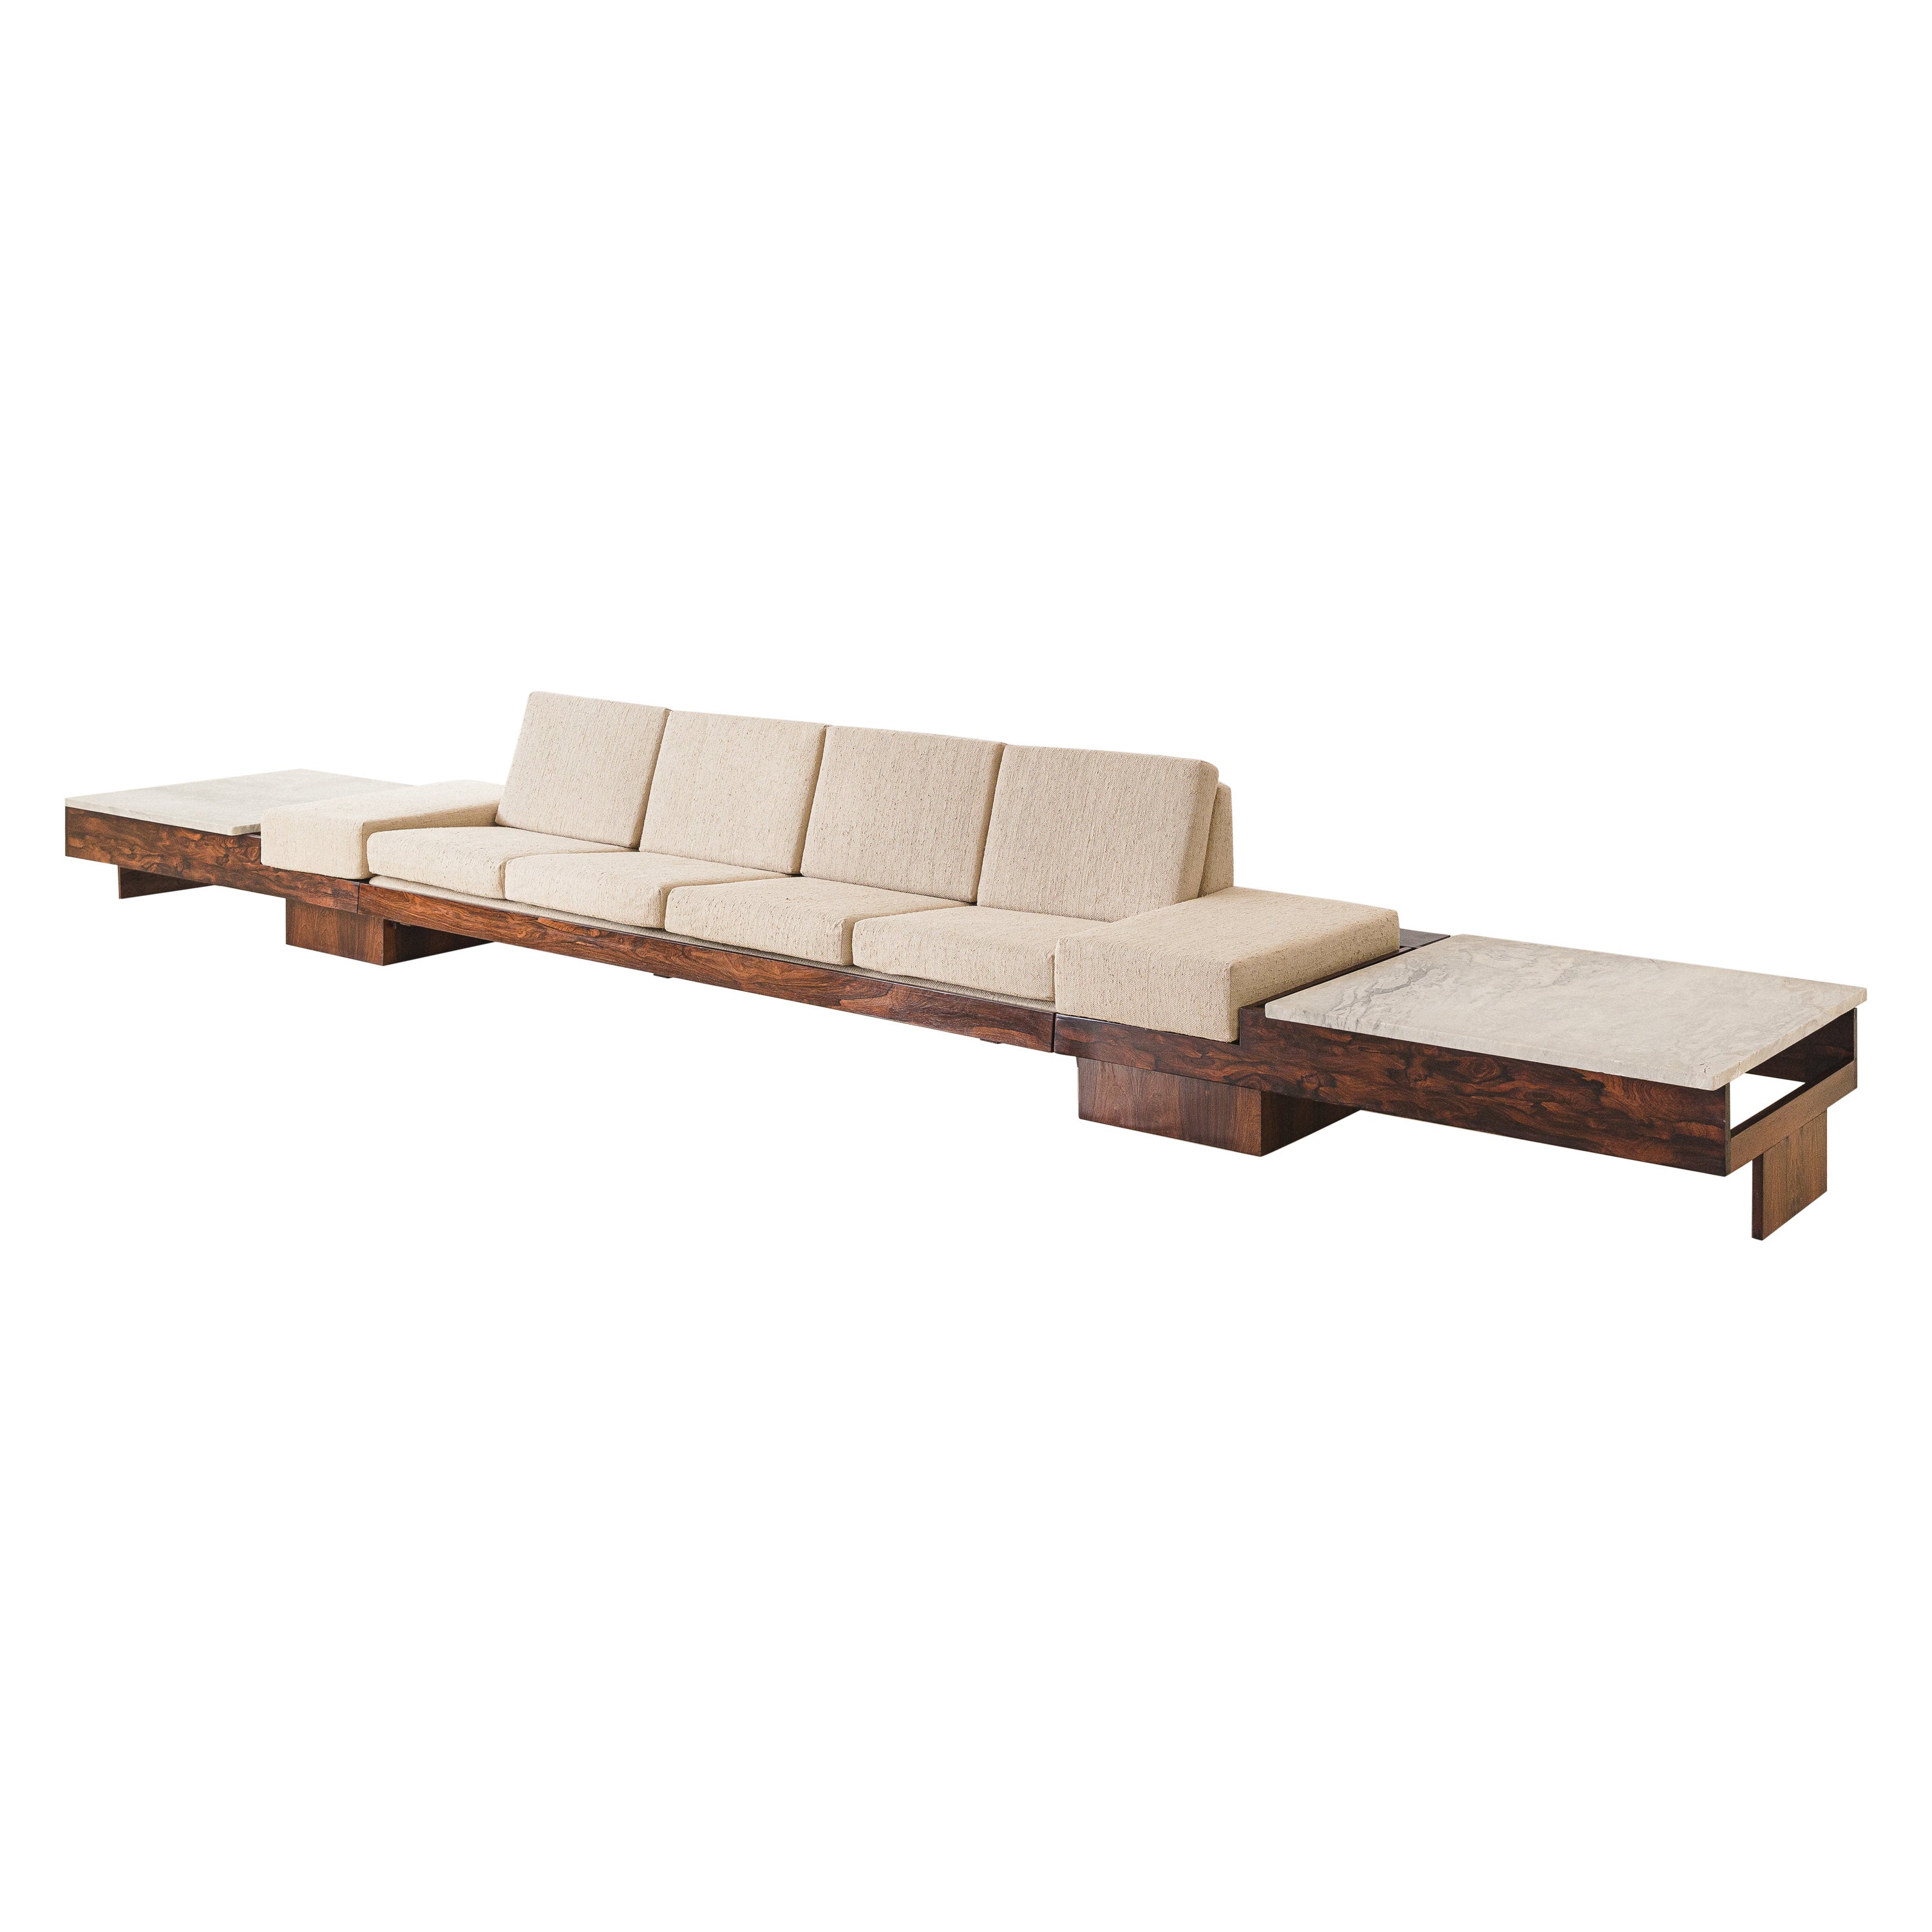 Midcentury Brazilian Sofa Design by Joaquim Tenreiro, Rosewood and Marble, 1960s For Sale